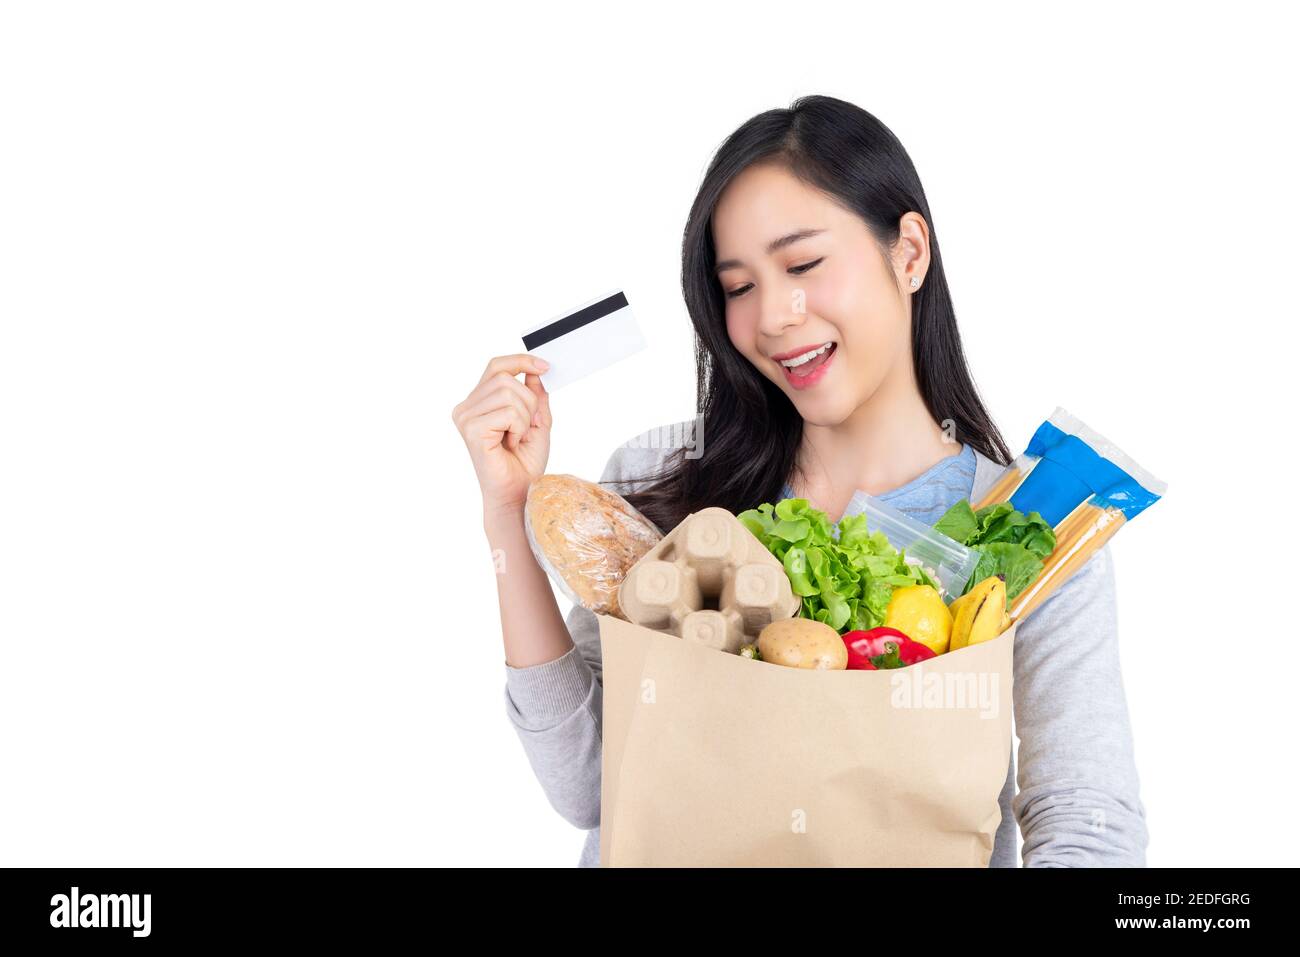 Beautiful Asian woman holding paper shopping bag full of vegetables and groceries just bought with credit card, studio shot isolated on white backgrou Stock Photo